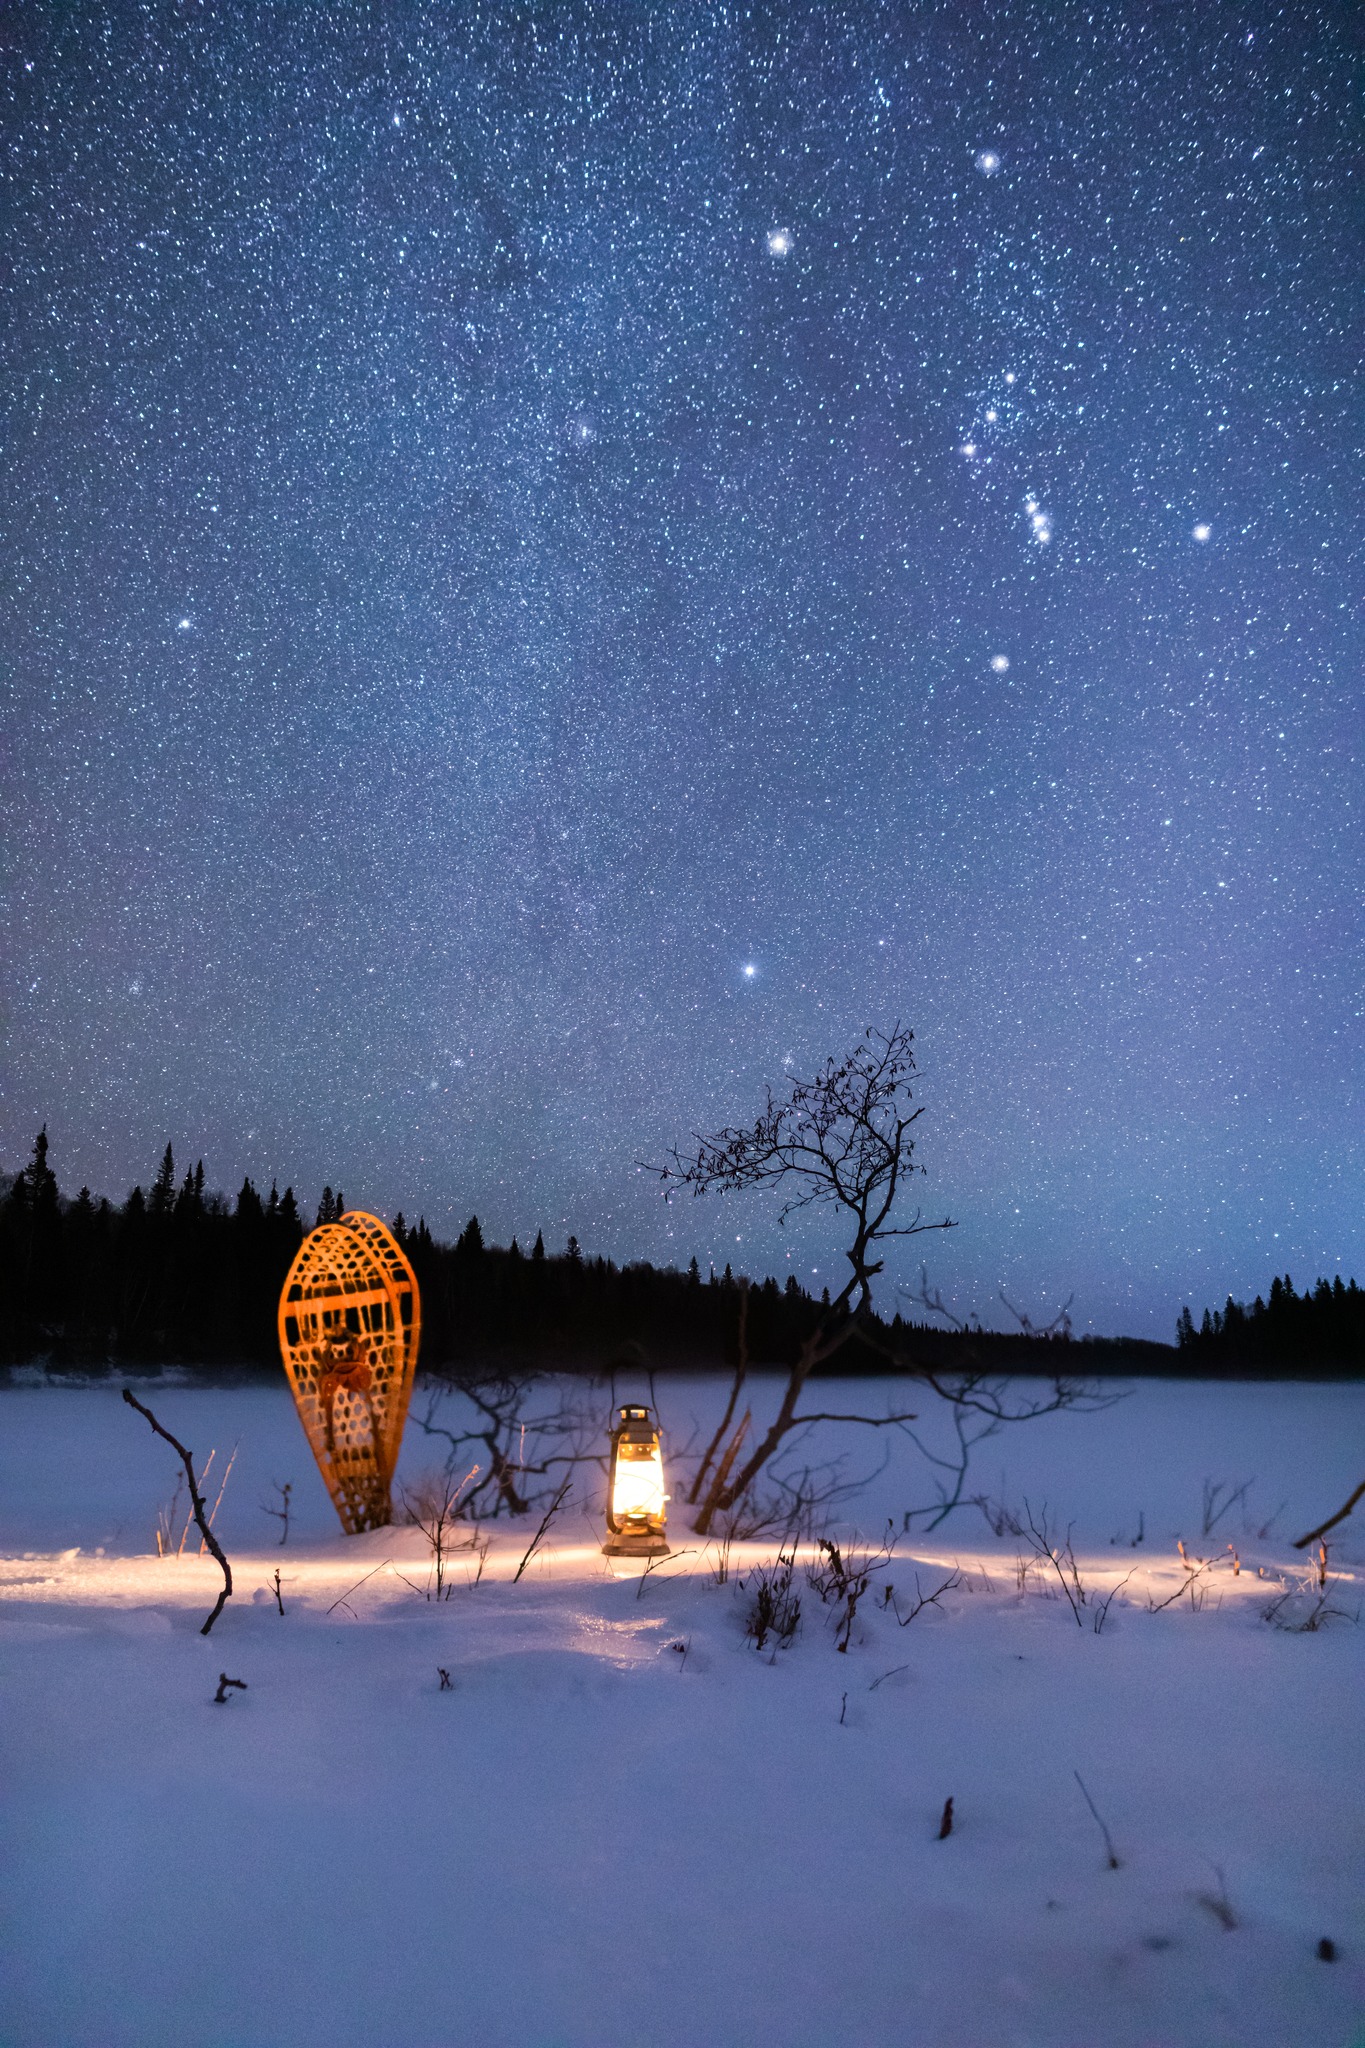 Thunder Bay Ontario night sky in the winter with snow and a snowshoe in the foreground. 